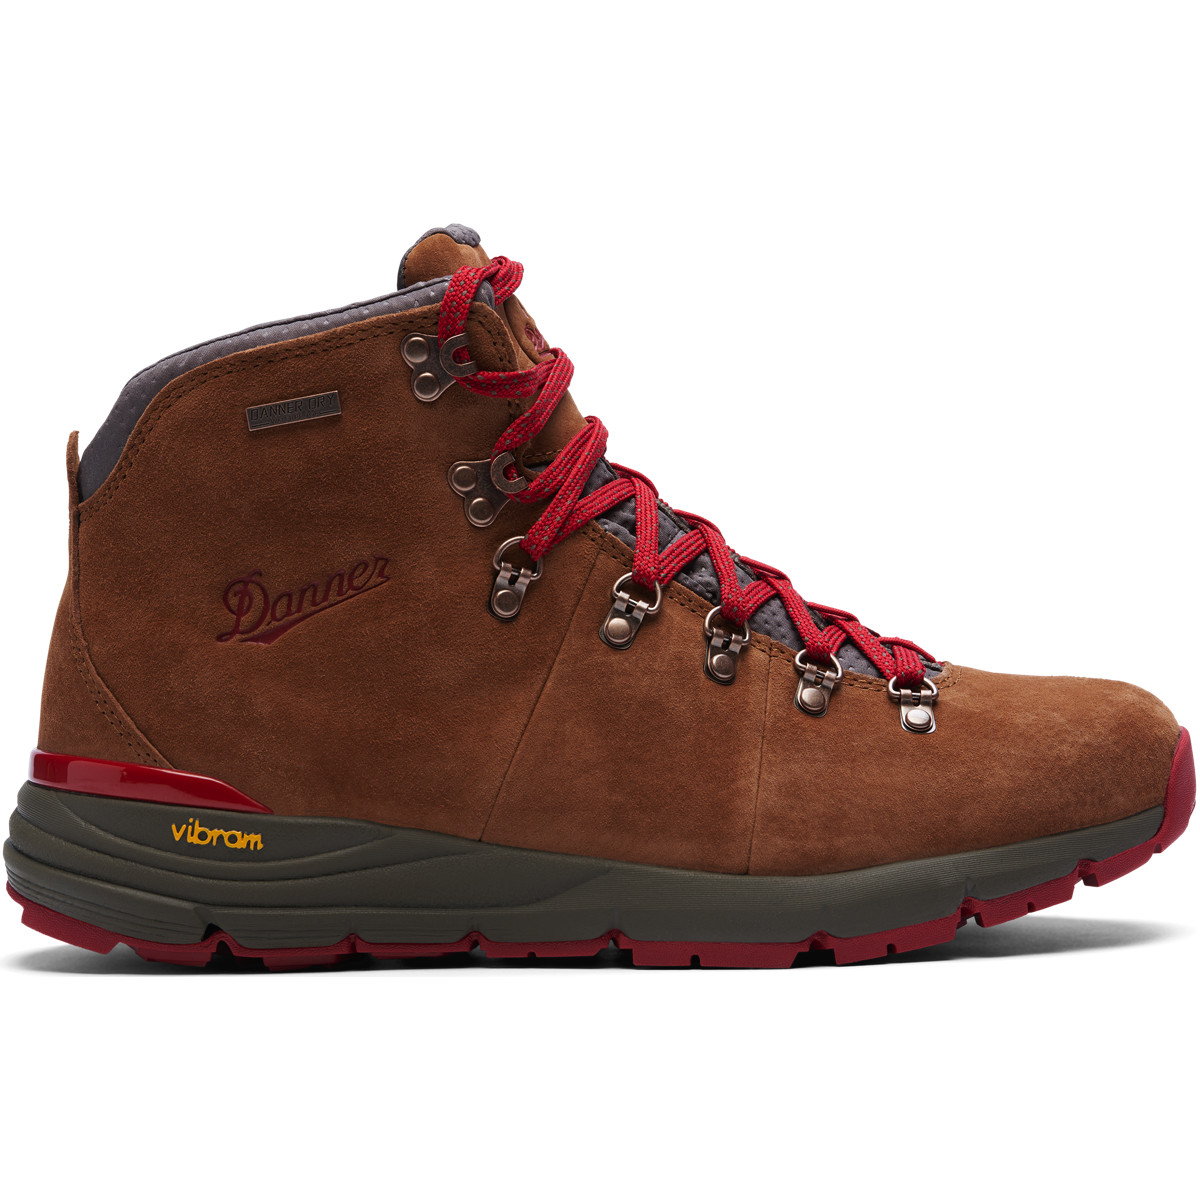 Danner Men's Mountain 600 Hiking Boots (Brown/Red) from Columbia Safety